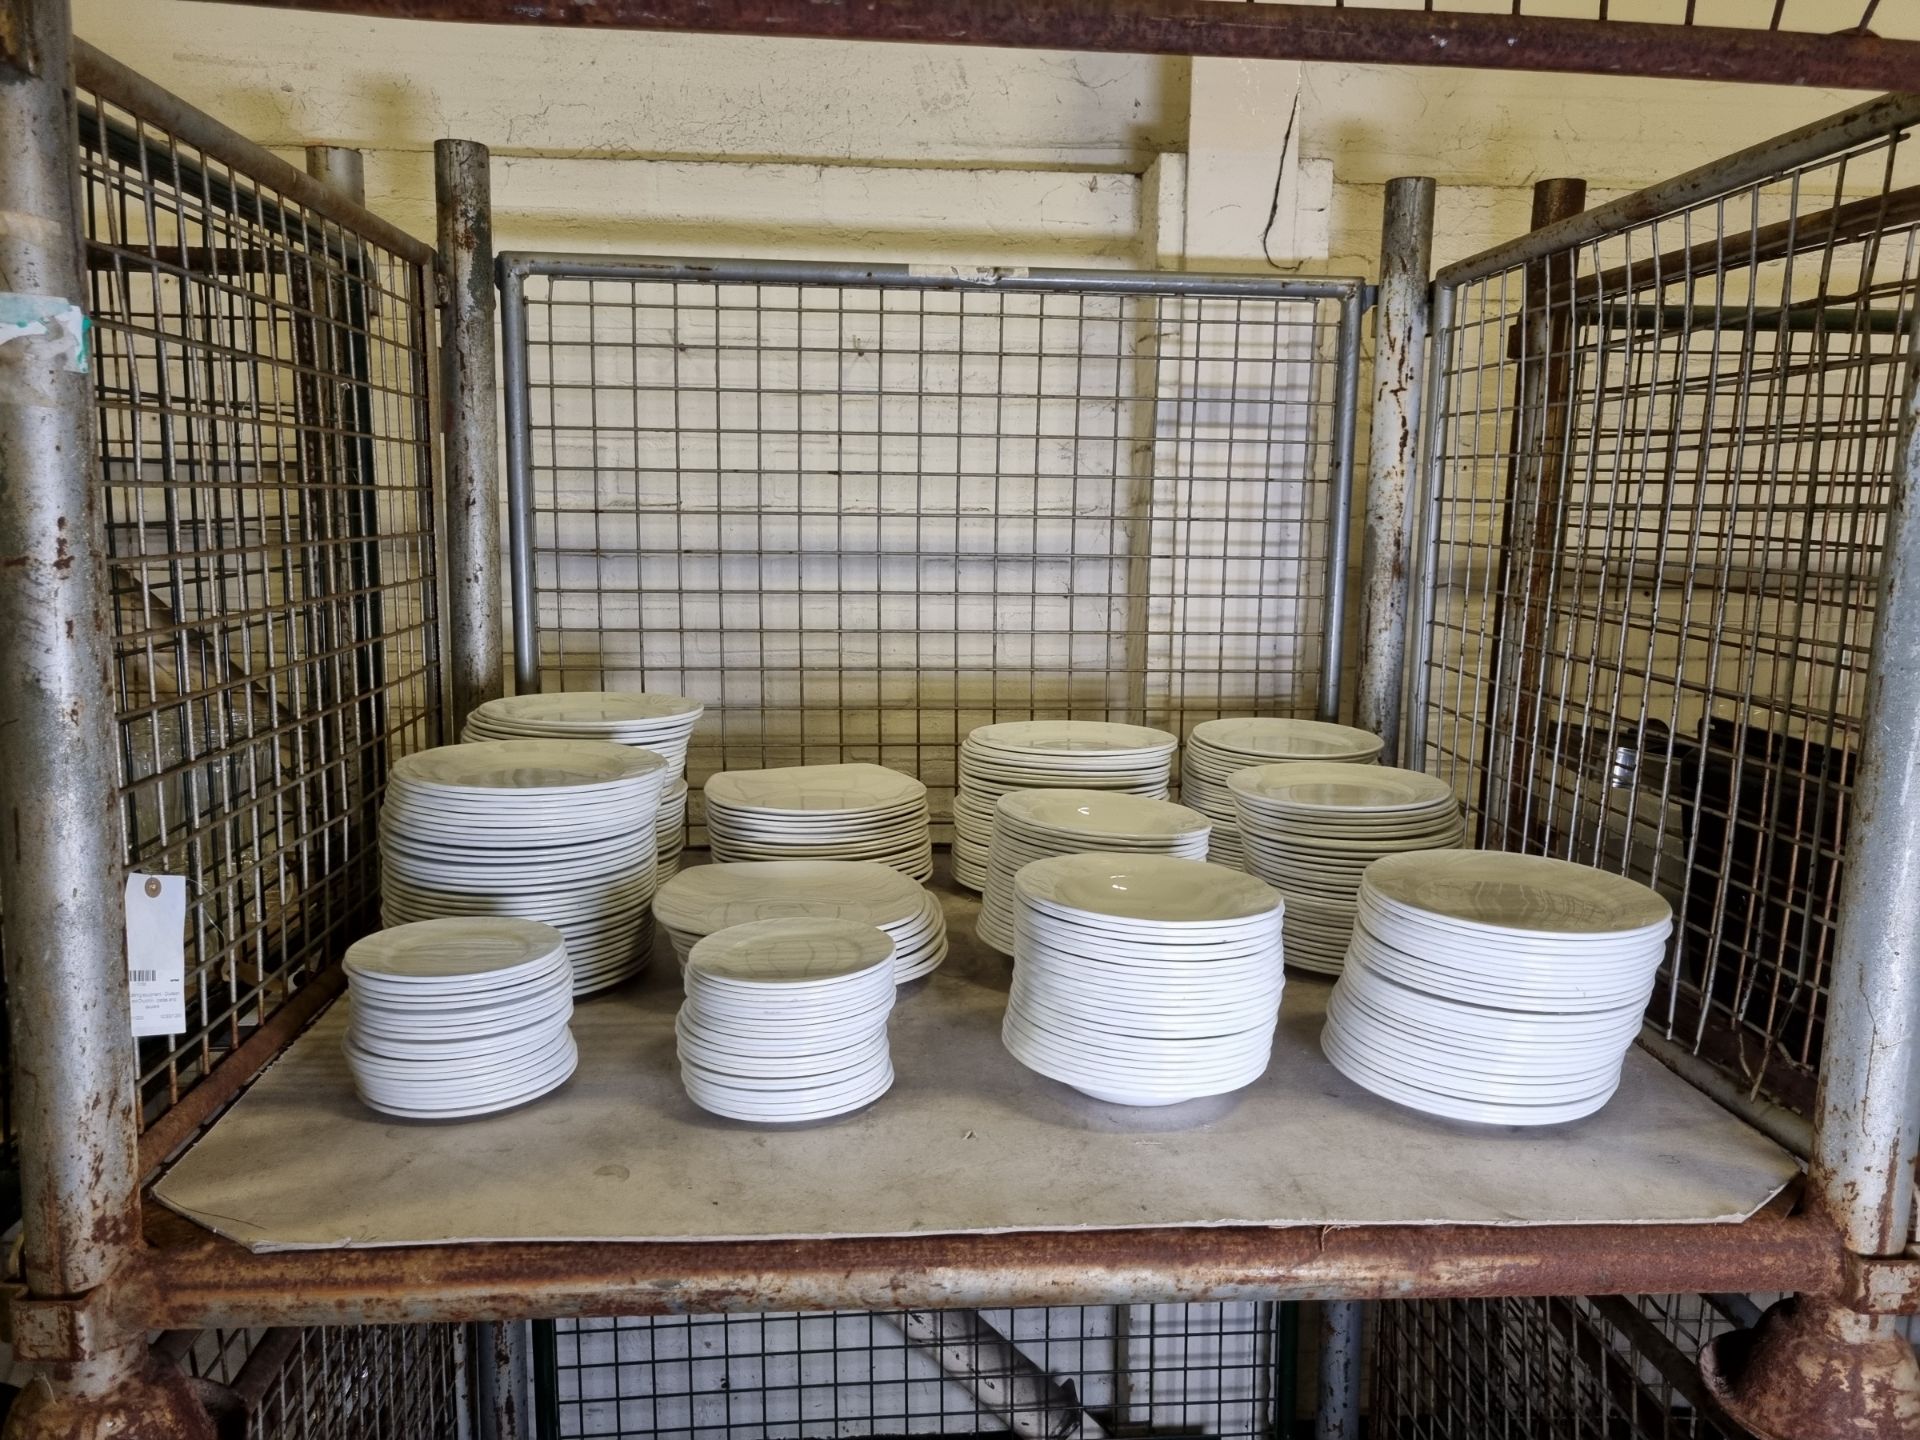 Catering equipment - Dudson and Churchill plates and saucers